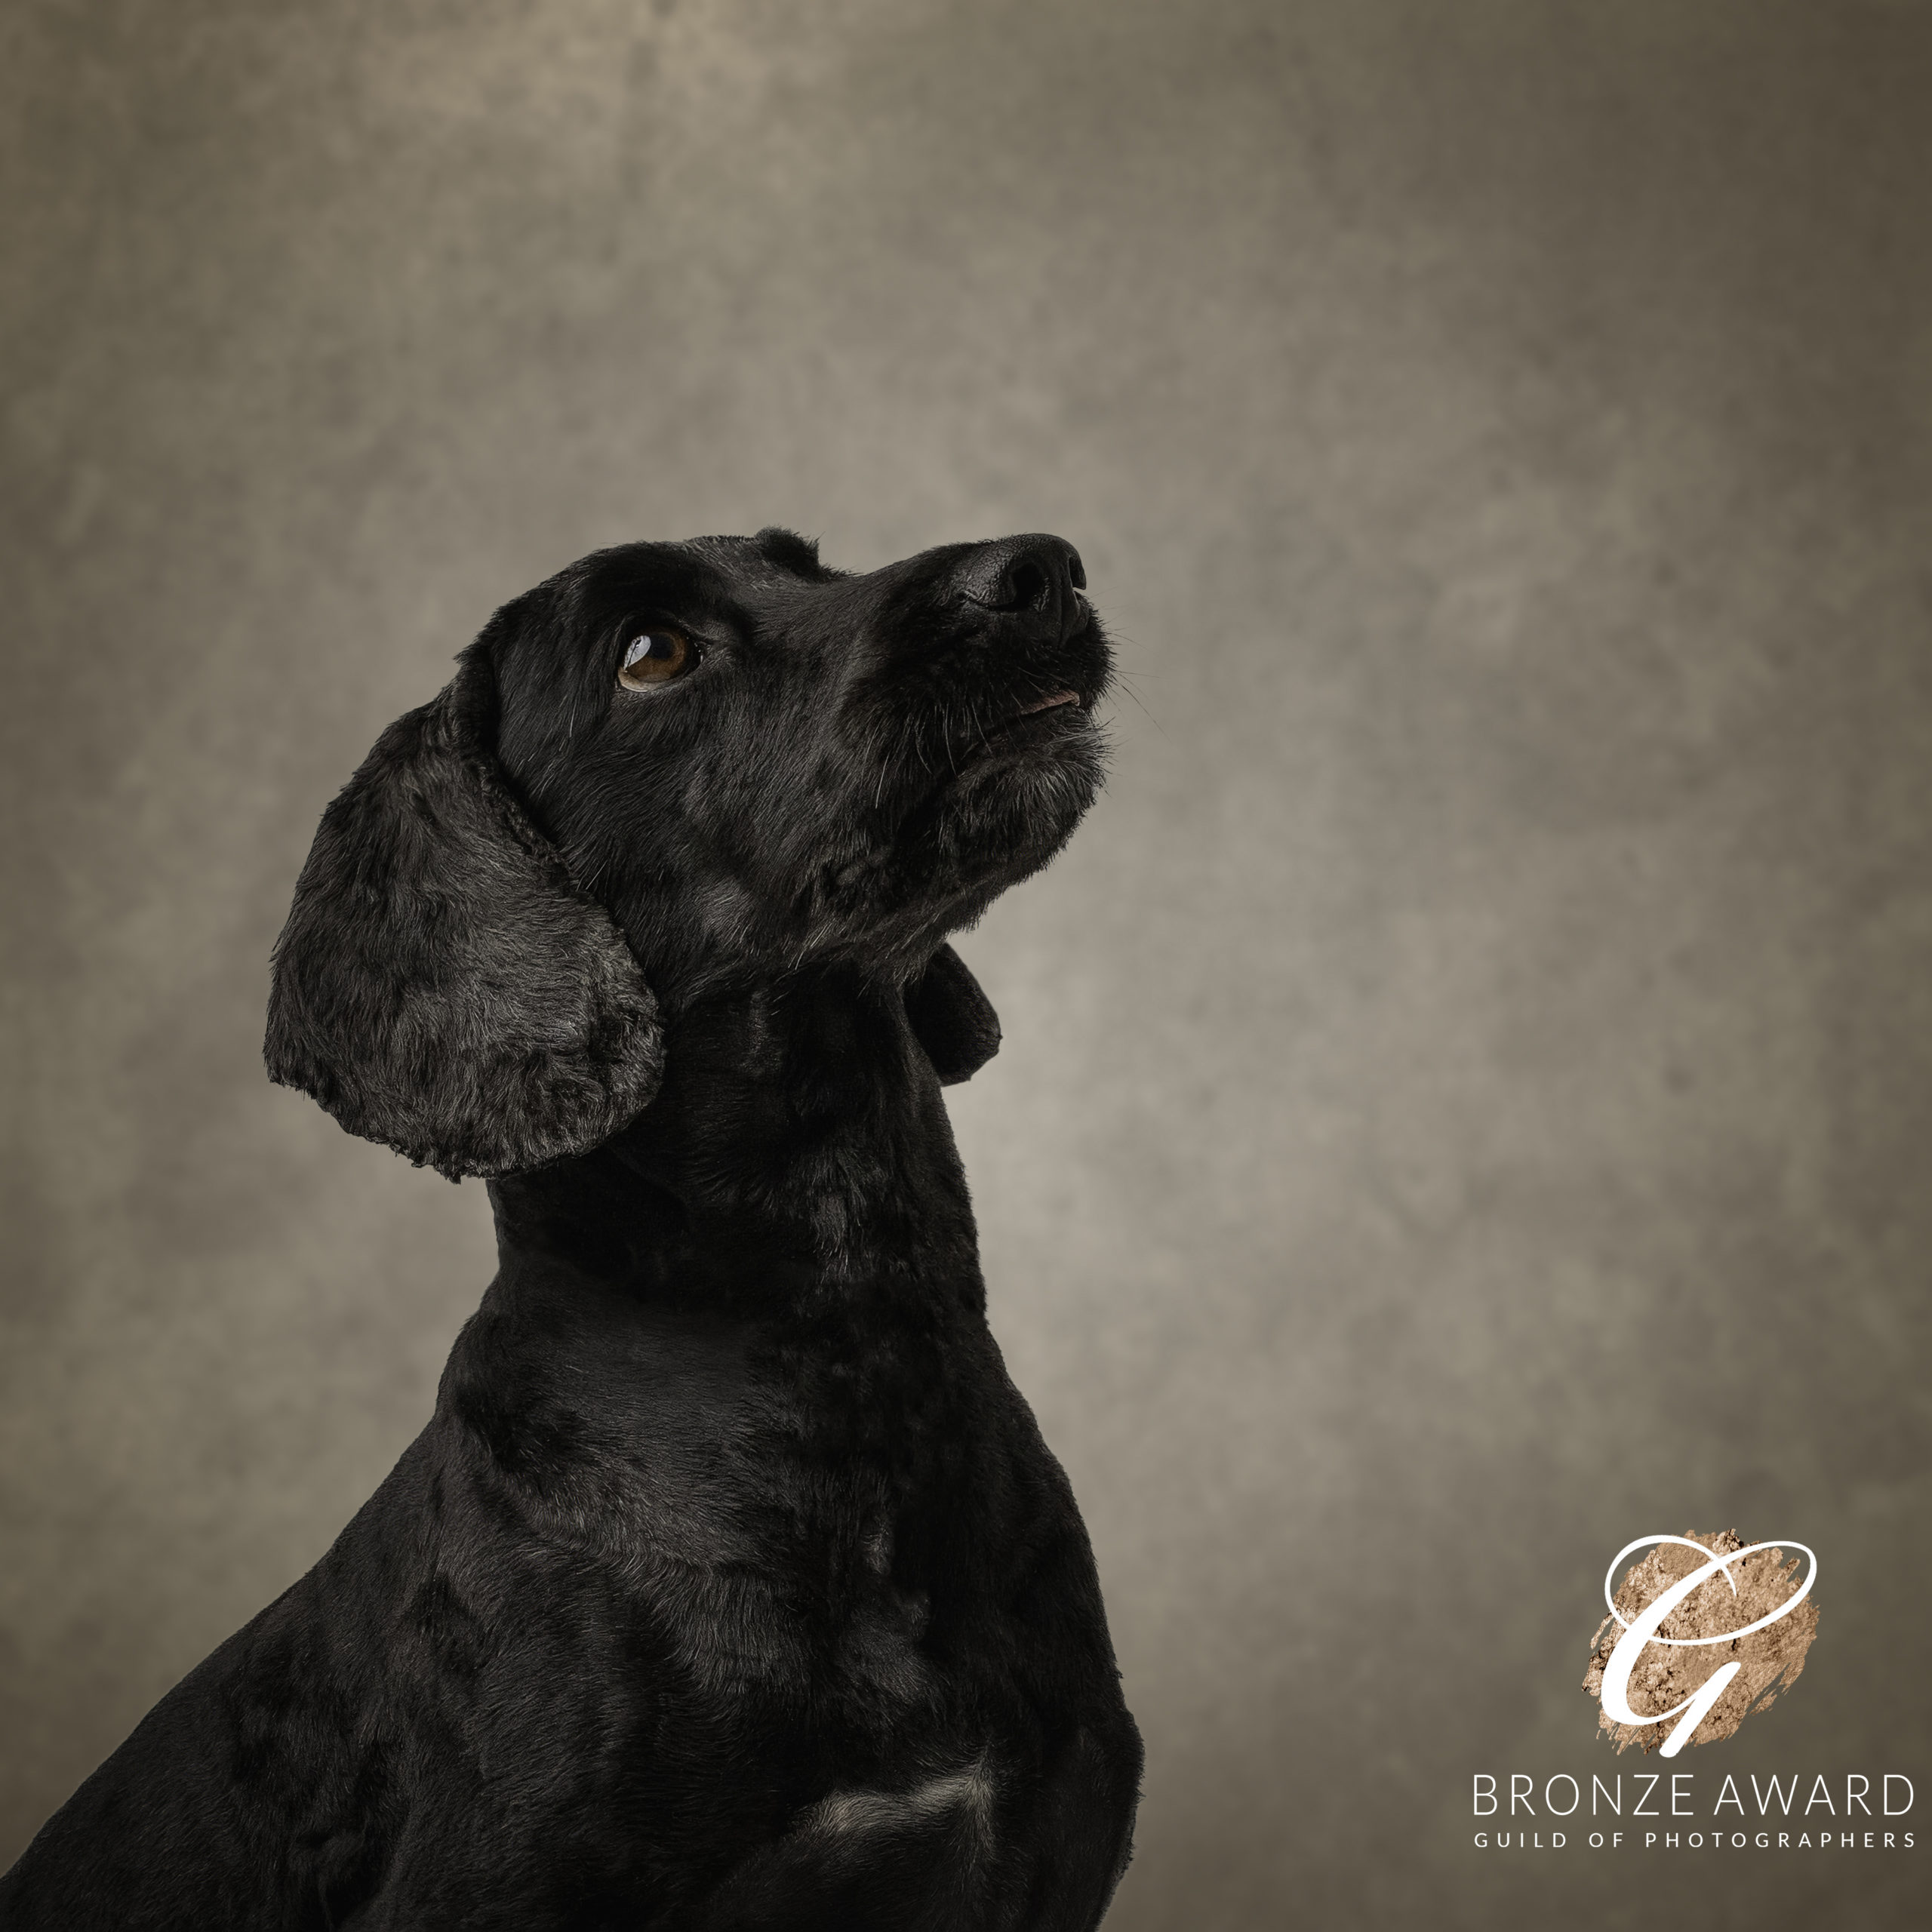 Gun Dog having a studio pet photography session with Dawn Hilton Photography, based in Melton Mowbray, Leicestershire